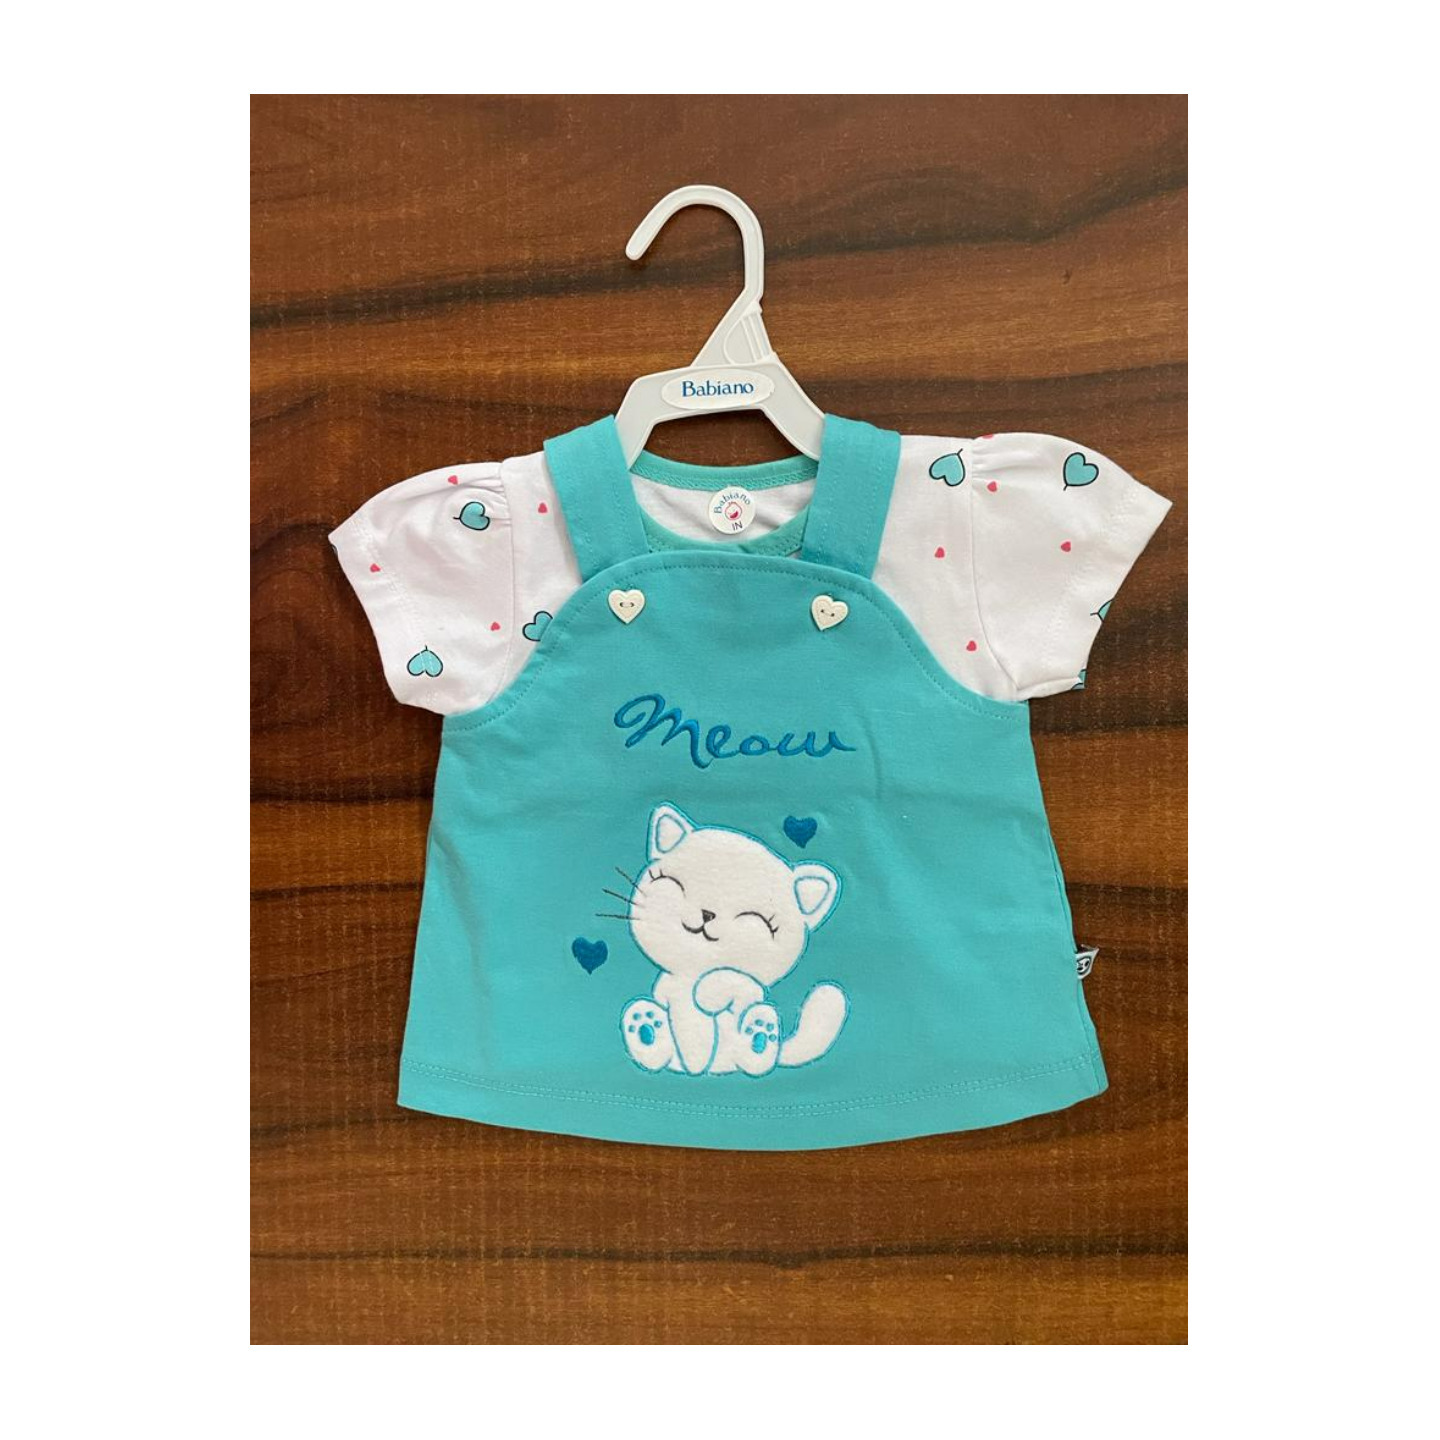 Babiano Girls Meow PINAFORE SET Rs 520 Only Small to 1.5 Years Size